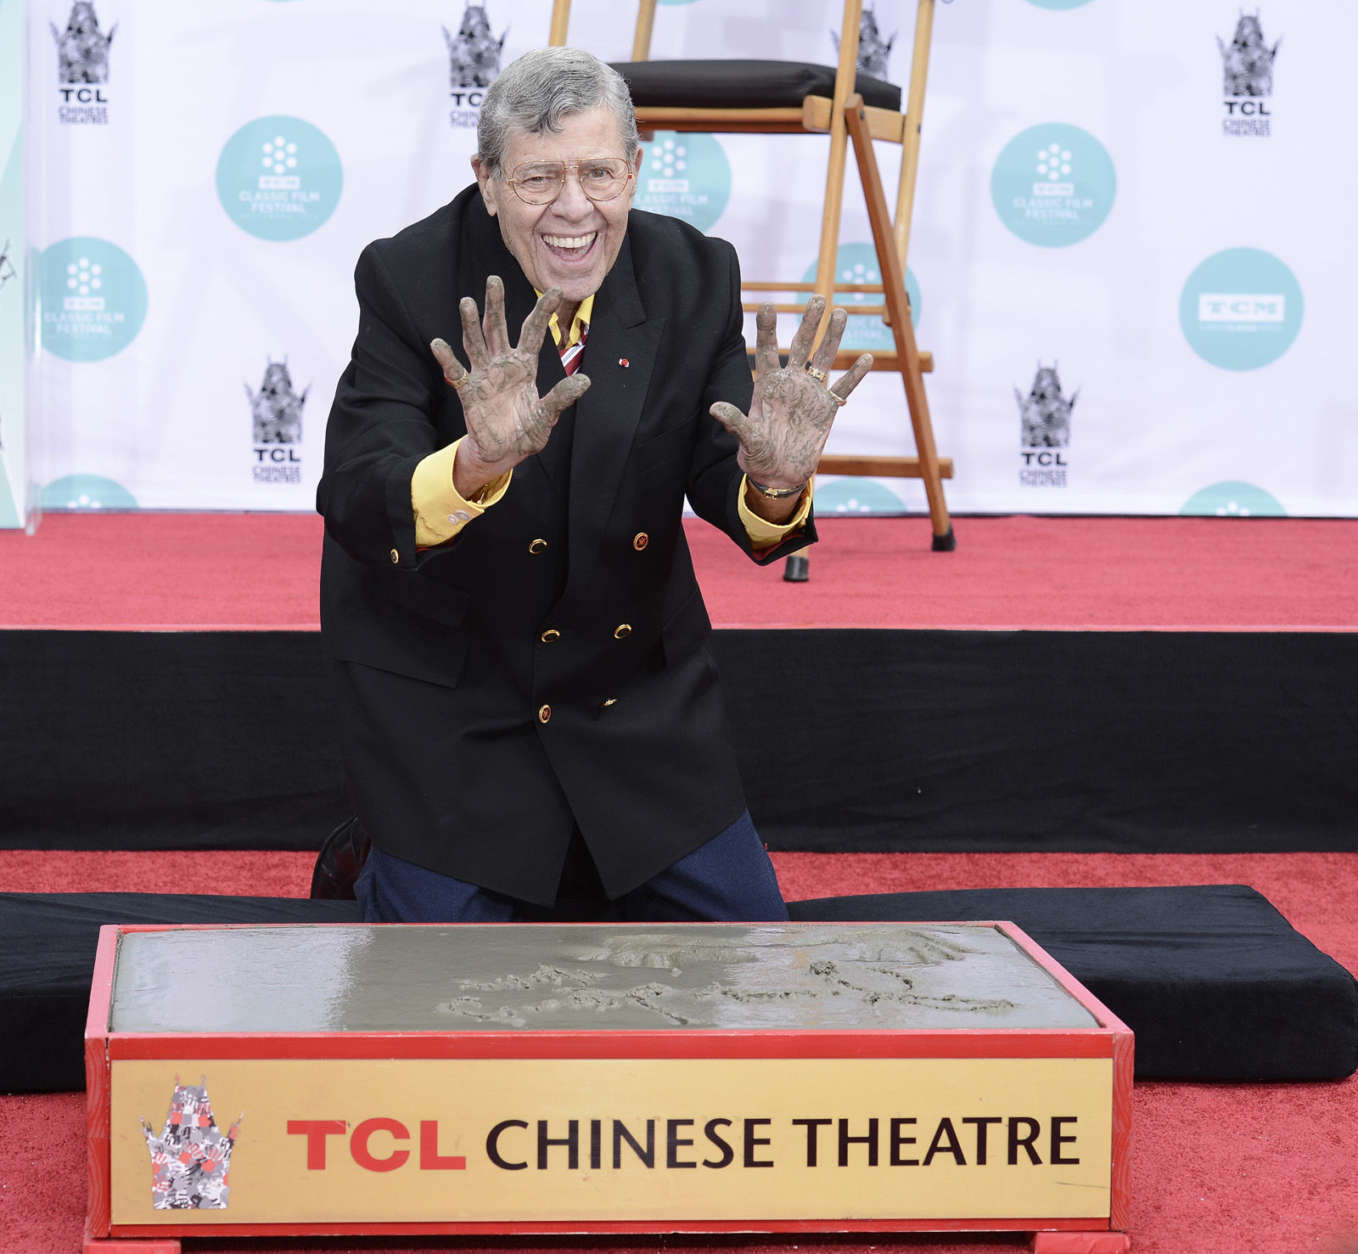 Actor and comedian Jerry Lewis is honored with a hand and footprint ceremony at TCL Chinese Theatre on Saturday, April 12, 2014 in Los Angeles. (Photo by Dan Steinberg/Invision/AP Images)